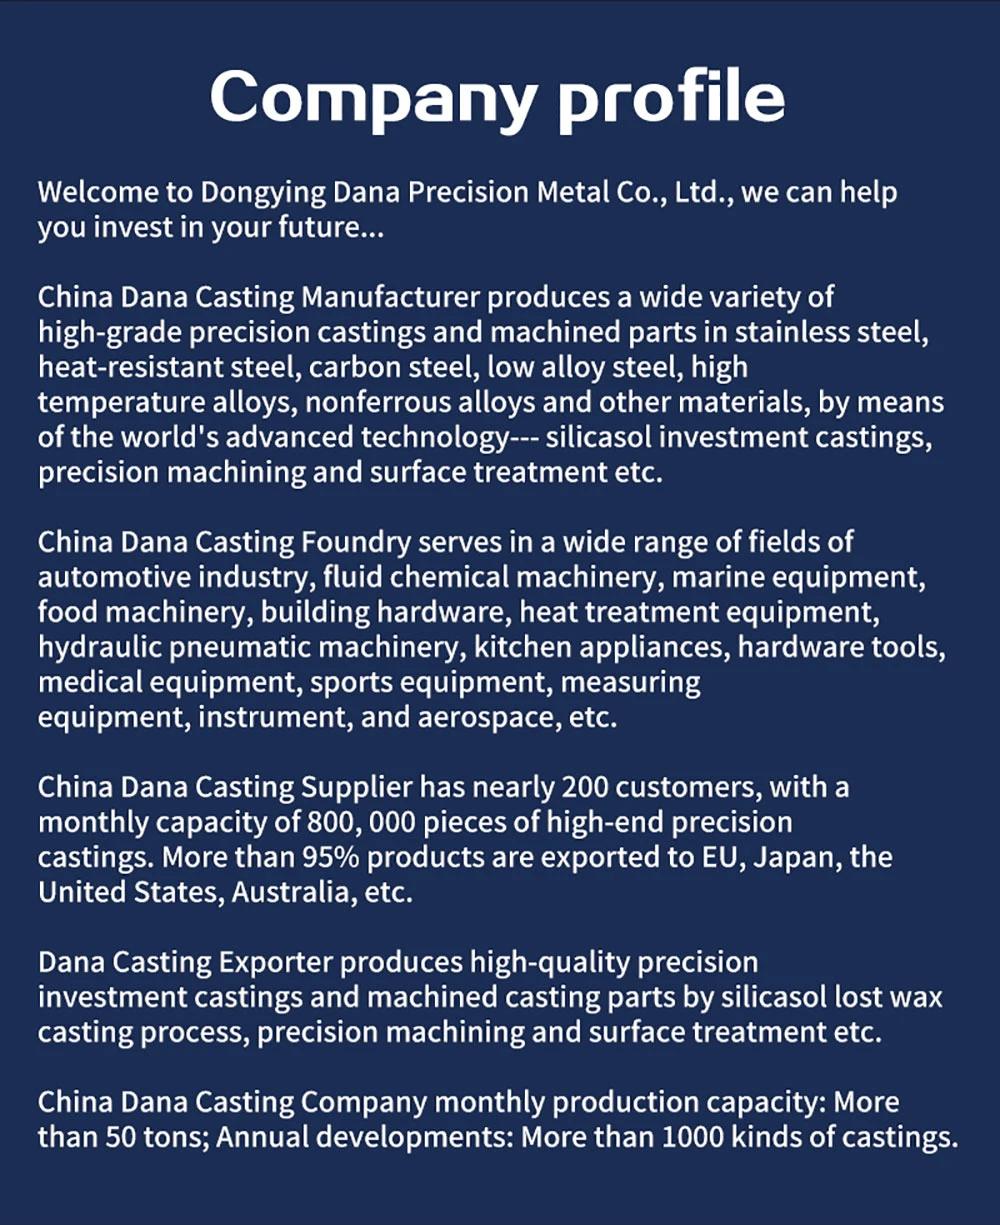 Die Casting/ Investment Casting/ Cast/Lost Wax Casting/ Precision Casting